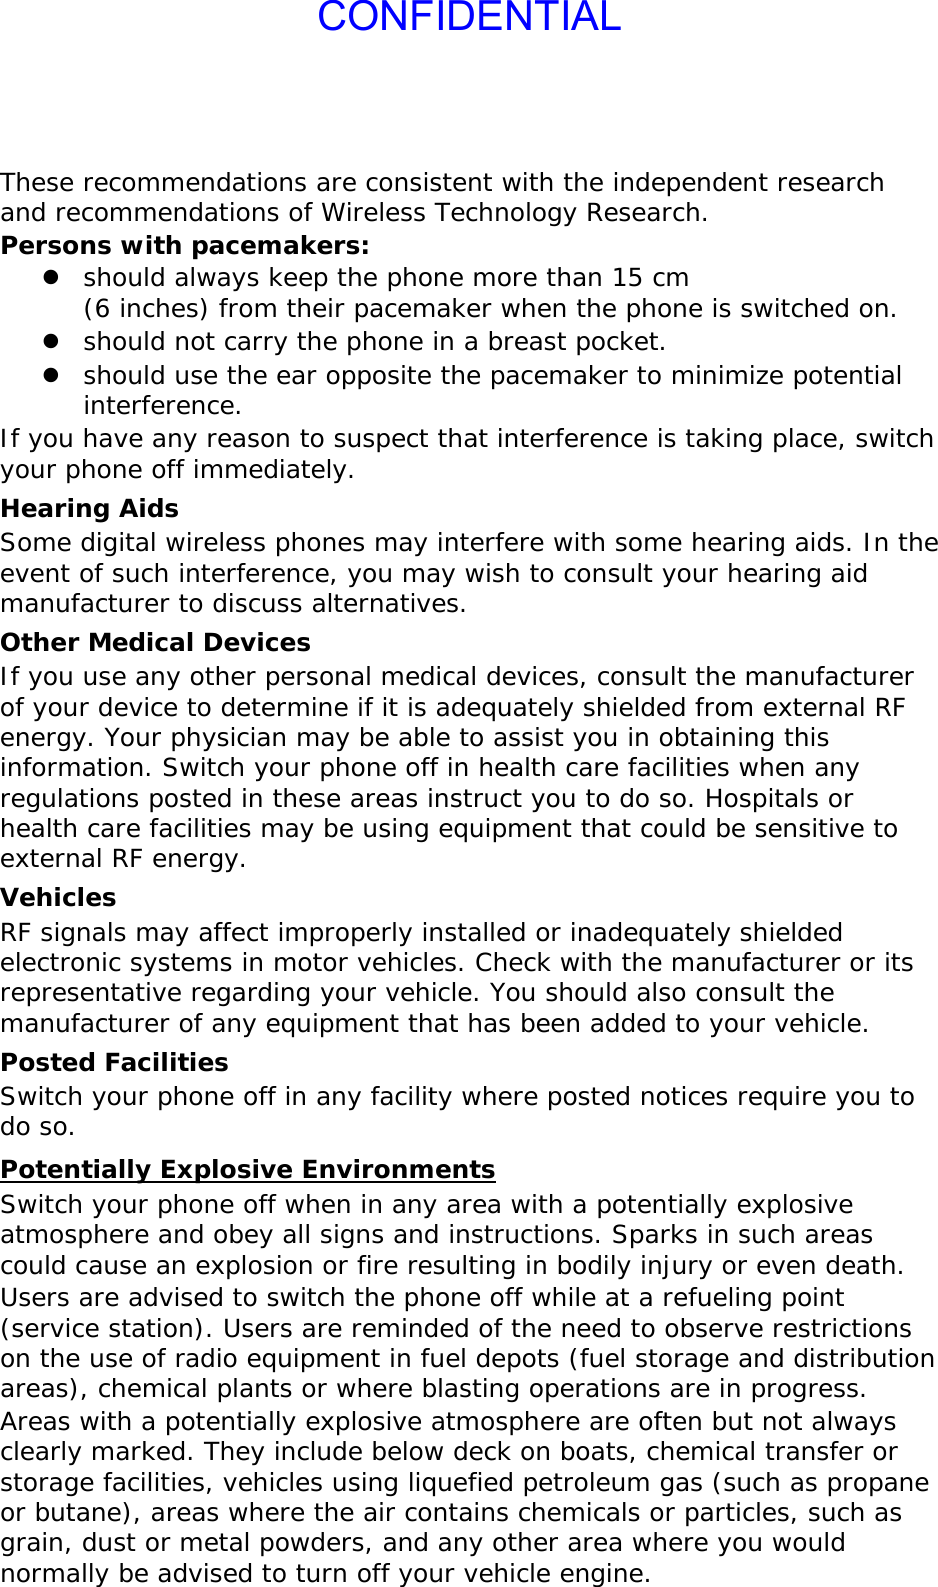 CONFIDENTIALThese recommendations are consistent with the independent research and recommendations of Wireless Technology Research. Persons with pacemakers: z should always keep the phone more than 15 cm  (6 inches) from their pacemaker when the phone is switched on. z should not carry the phone in a breast pocket. z should use the ear opposite the pacemaker to minimize potential interference. If you have any reason to suspect that interference is taking place, switch your phone off immediately. Hearing Aids Some digital wireless phones may interfere with some hearing aids. In the event of such interference, you may wish to consult your hearing aid manufacturer to discuss alternatives. Other Medical Devices If you use any other personal medical devices, consult the manufacturer of your device to determine if it is adequately shielded from external RF energy. Your physician may be able to assist you in obtaining this information. Switch your phone off in health care facilities when any regulations posted in these areas instruct you to do so. Hospitals or health care facilities may be using equipment that could be sensitive to external RF energy. Vehicles RF signals may affect improperly installed or inadequately shielded electronic systems in motor vehicles. Check with the manufacturer or its representative regarding your vehicle. You should also consult the manufacturer of any equipment that has been added to your vehicle. Posted Facilities Switch your phone off in any facility where posted notices require you to do so. Potentially Explosive Environments Switch your phone off when in any area with a potentially explosive atmosphere and obey all signs and instructions. Sparks in such areas could cause an explosion or fire resulting in bodily injury or even death. Users are advised to switch the phone off while at a refueling point (service station). Users are reminded of the need to observe restrictions on the use of radio equipment in fuel depots (fuel storage and distribution areas), chemical plants or where blasting operations are in progress. Areas with a potentially explosive atmosphere are often but not always clearly marked. They include below deck on boats, chemical transfer or storage facilities, vehicles using liquefied petroleum gas (such as propane or butane), areas where the air contains chemicals or particles, such as grain, dust or metal powders, and any other area where you would normally be advised to turn off your vehicle engine. 